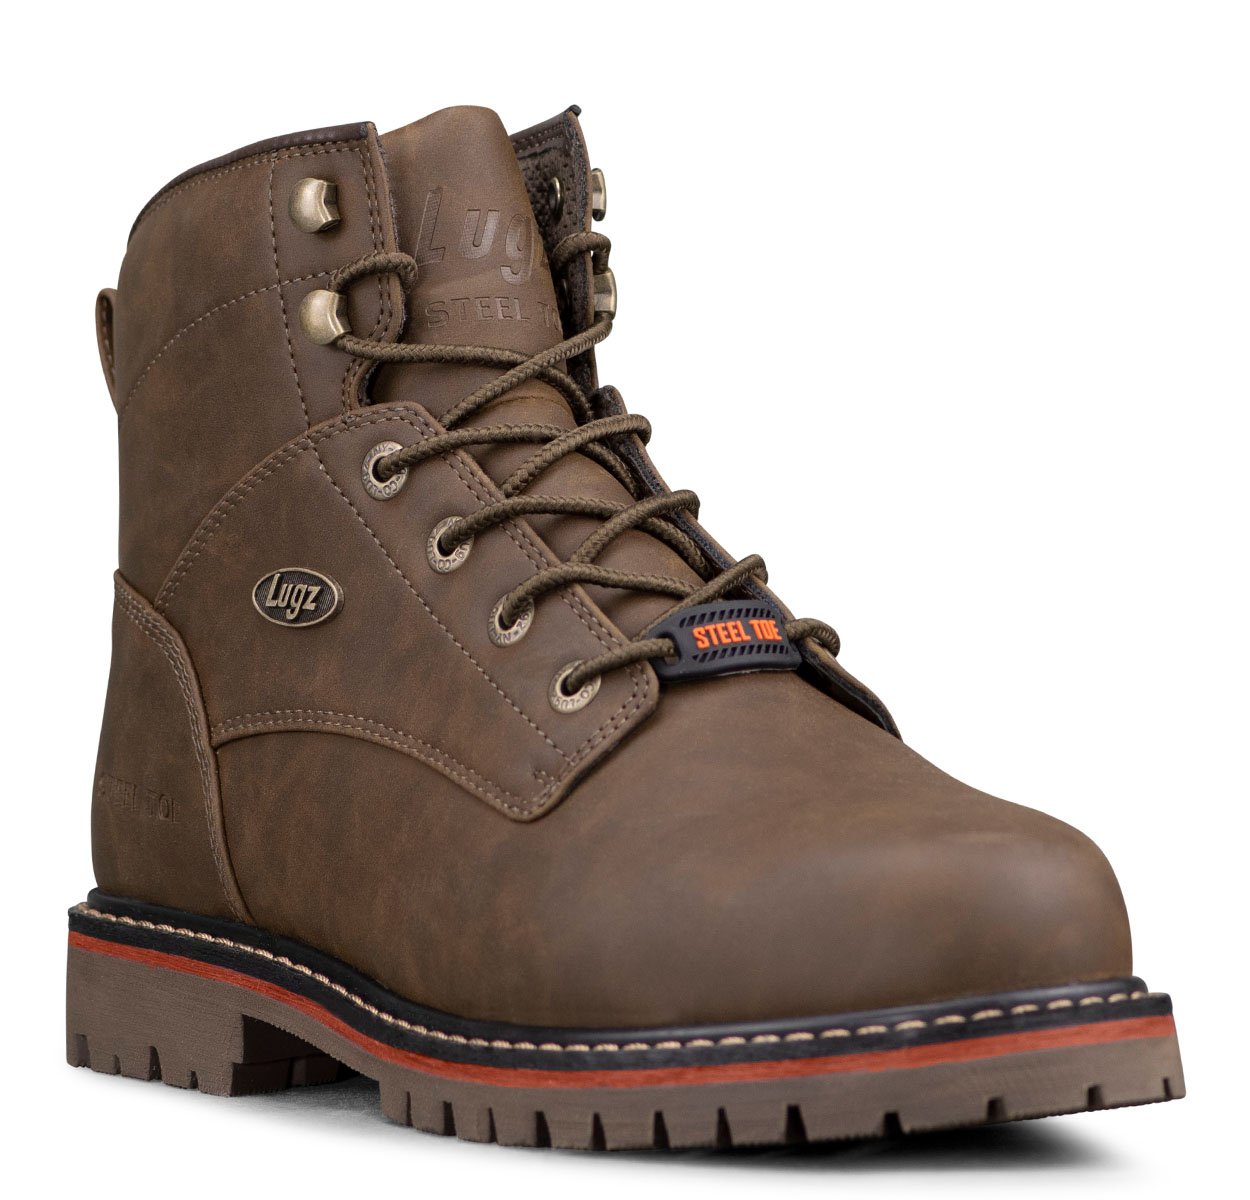 Lugz Winter Clearance: Up to 60% Off on Select Styles